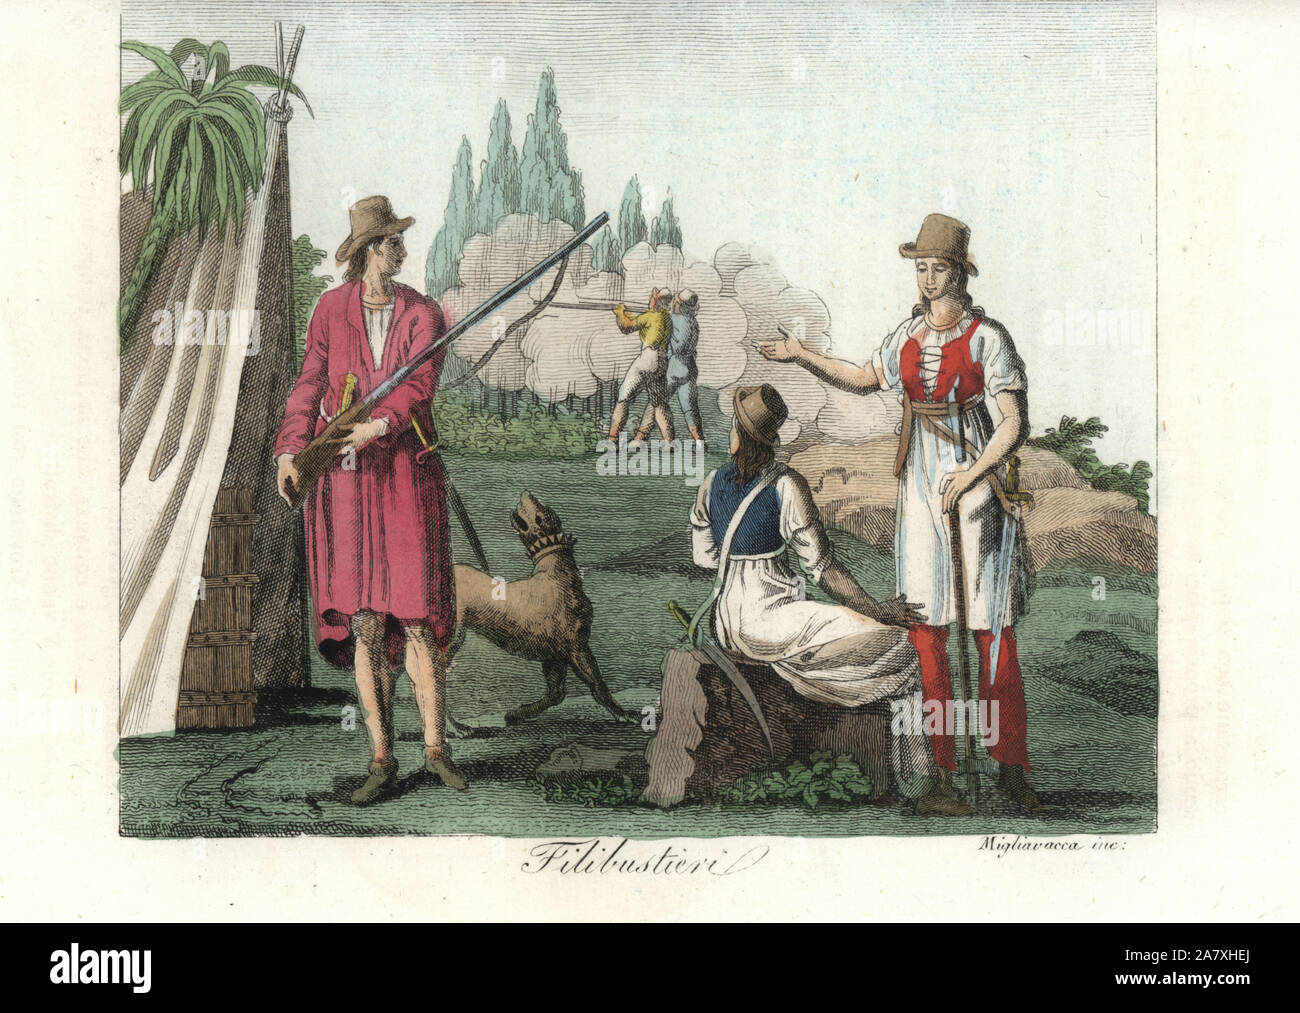 Male and female pirates of the West Indies, armed with musket and cutlass, early 1800s. The buccaneer at left wears a linen shirt dyed with animal blood. Handcoloured copperplate engraving by Migliavacca from Giulio Ferrrario's Costumes Antique and Modern of All Peoples (Il Costume Antico e Moderno di Tutti i Popoli), Florence, 1842. Stock Photo